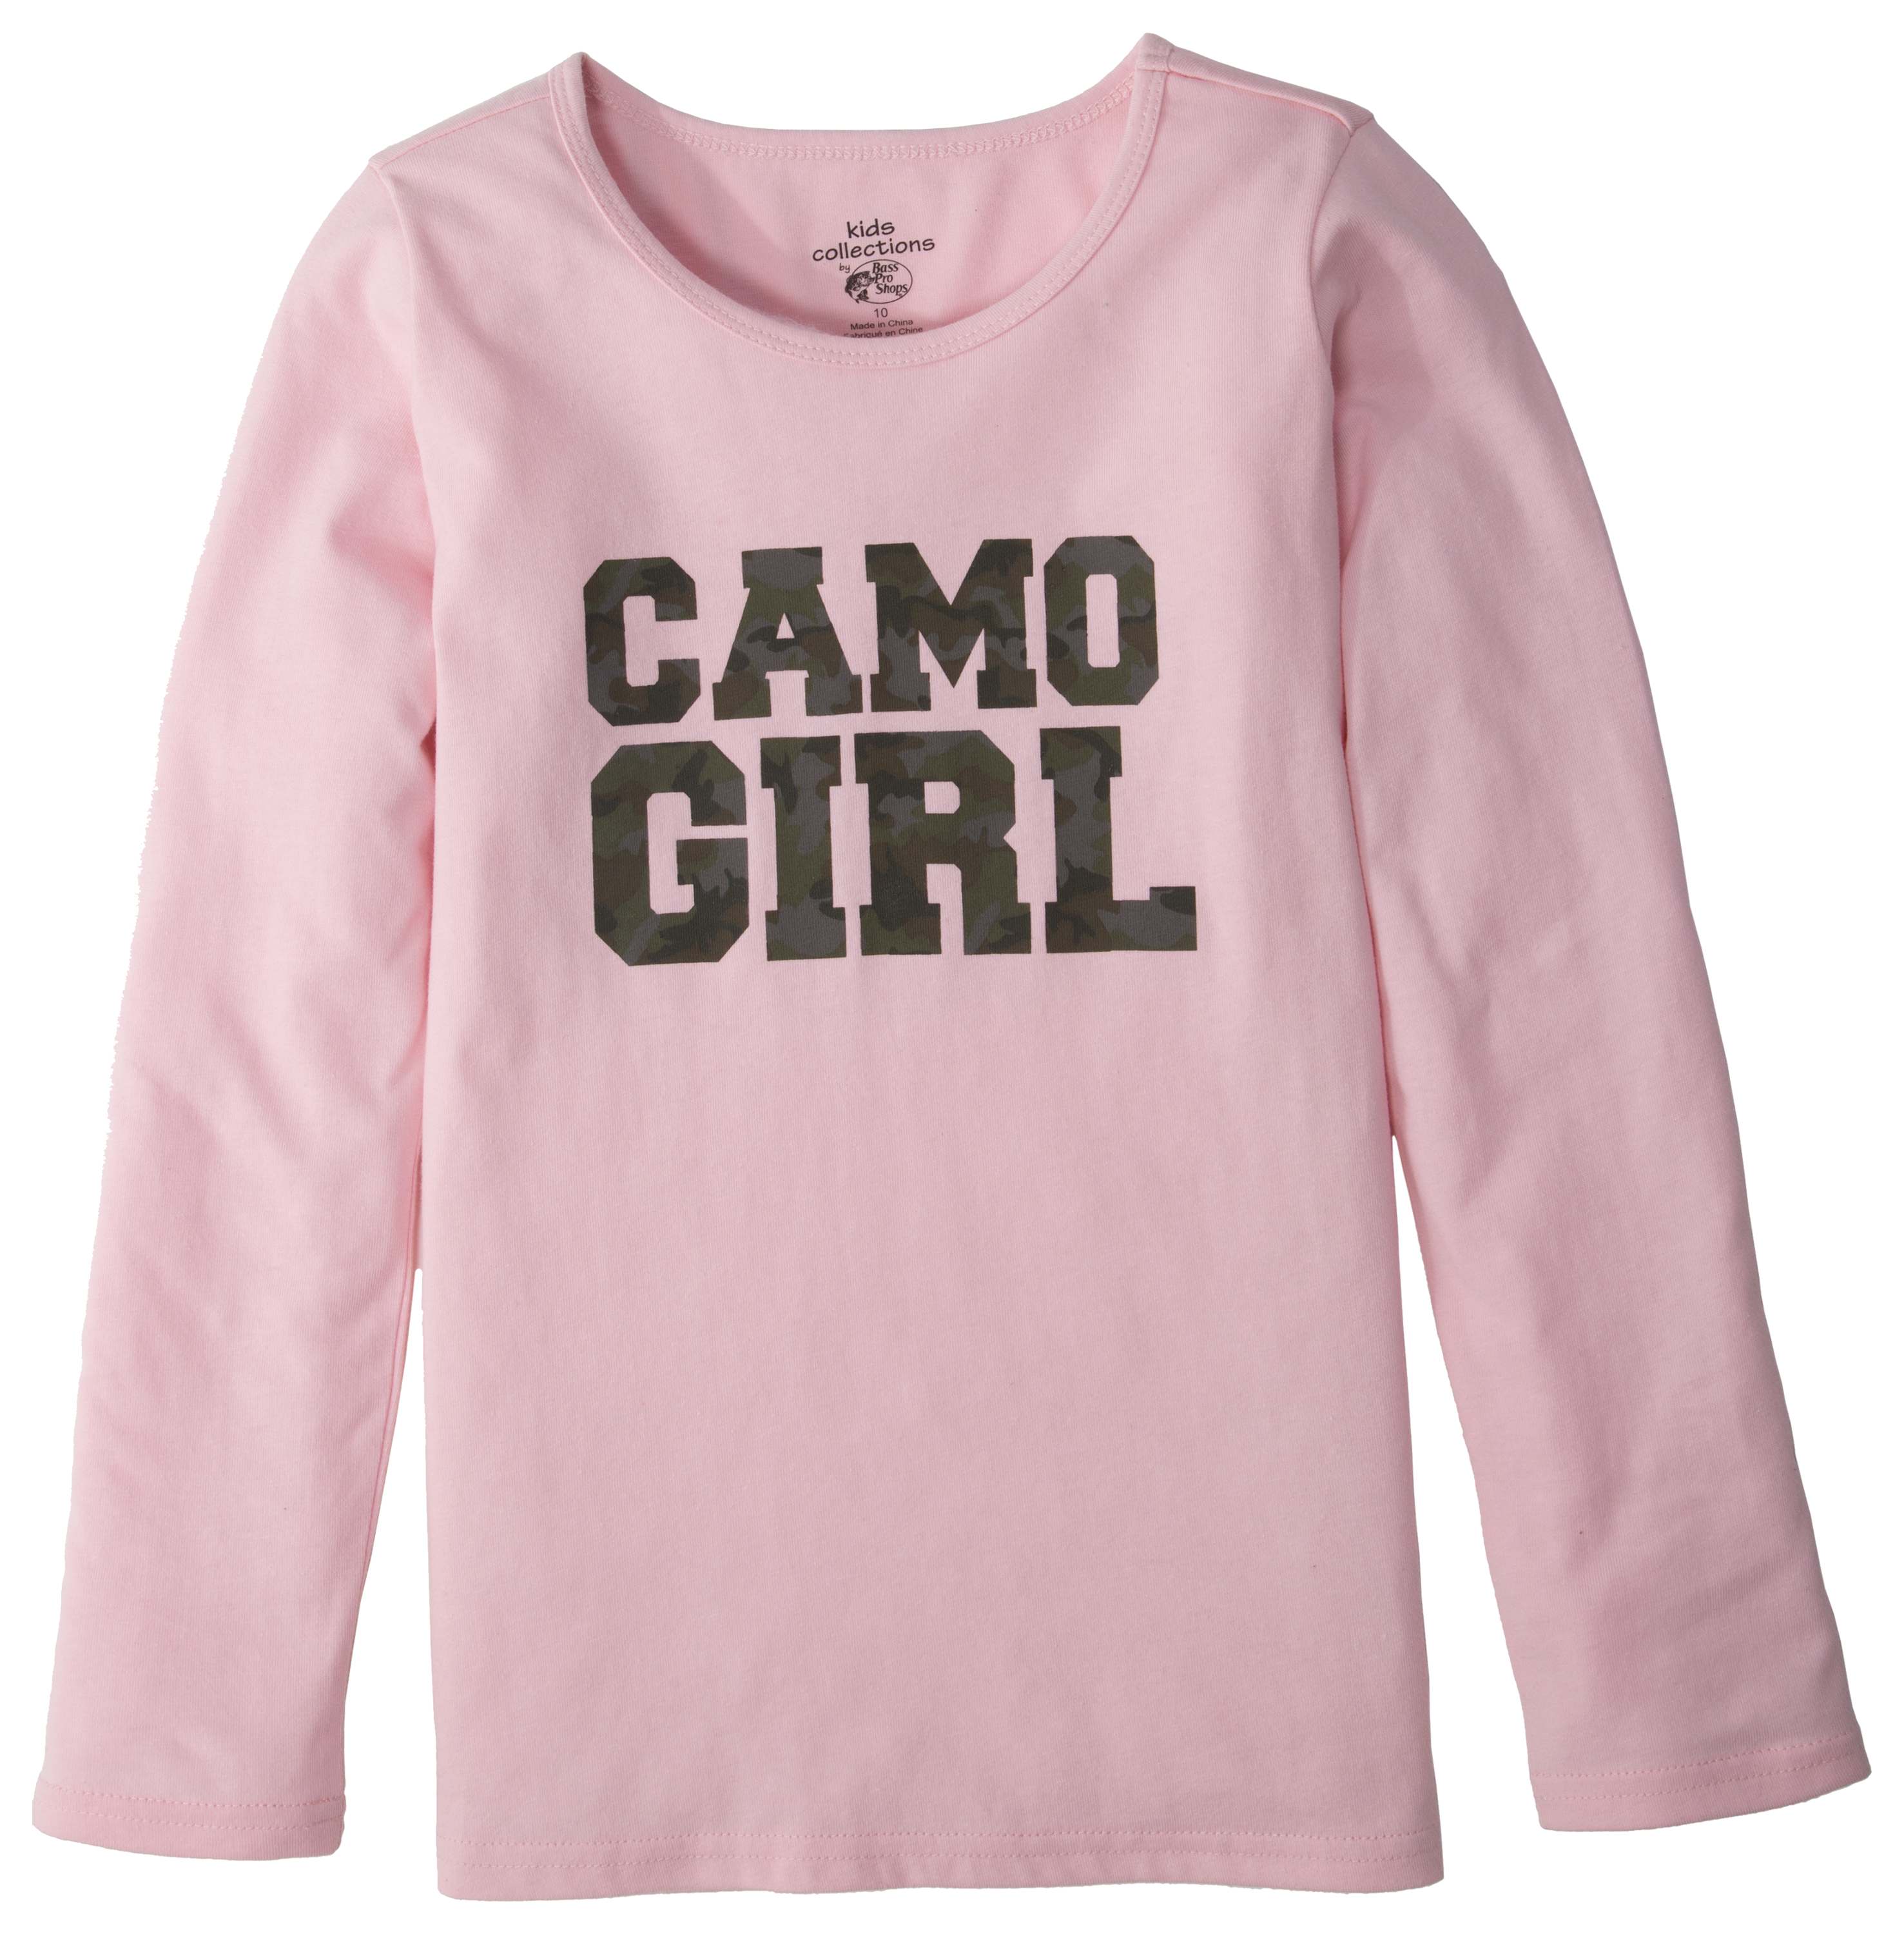 Bass Pro Shops Camo Girl Shirt for Toddlers or Girls